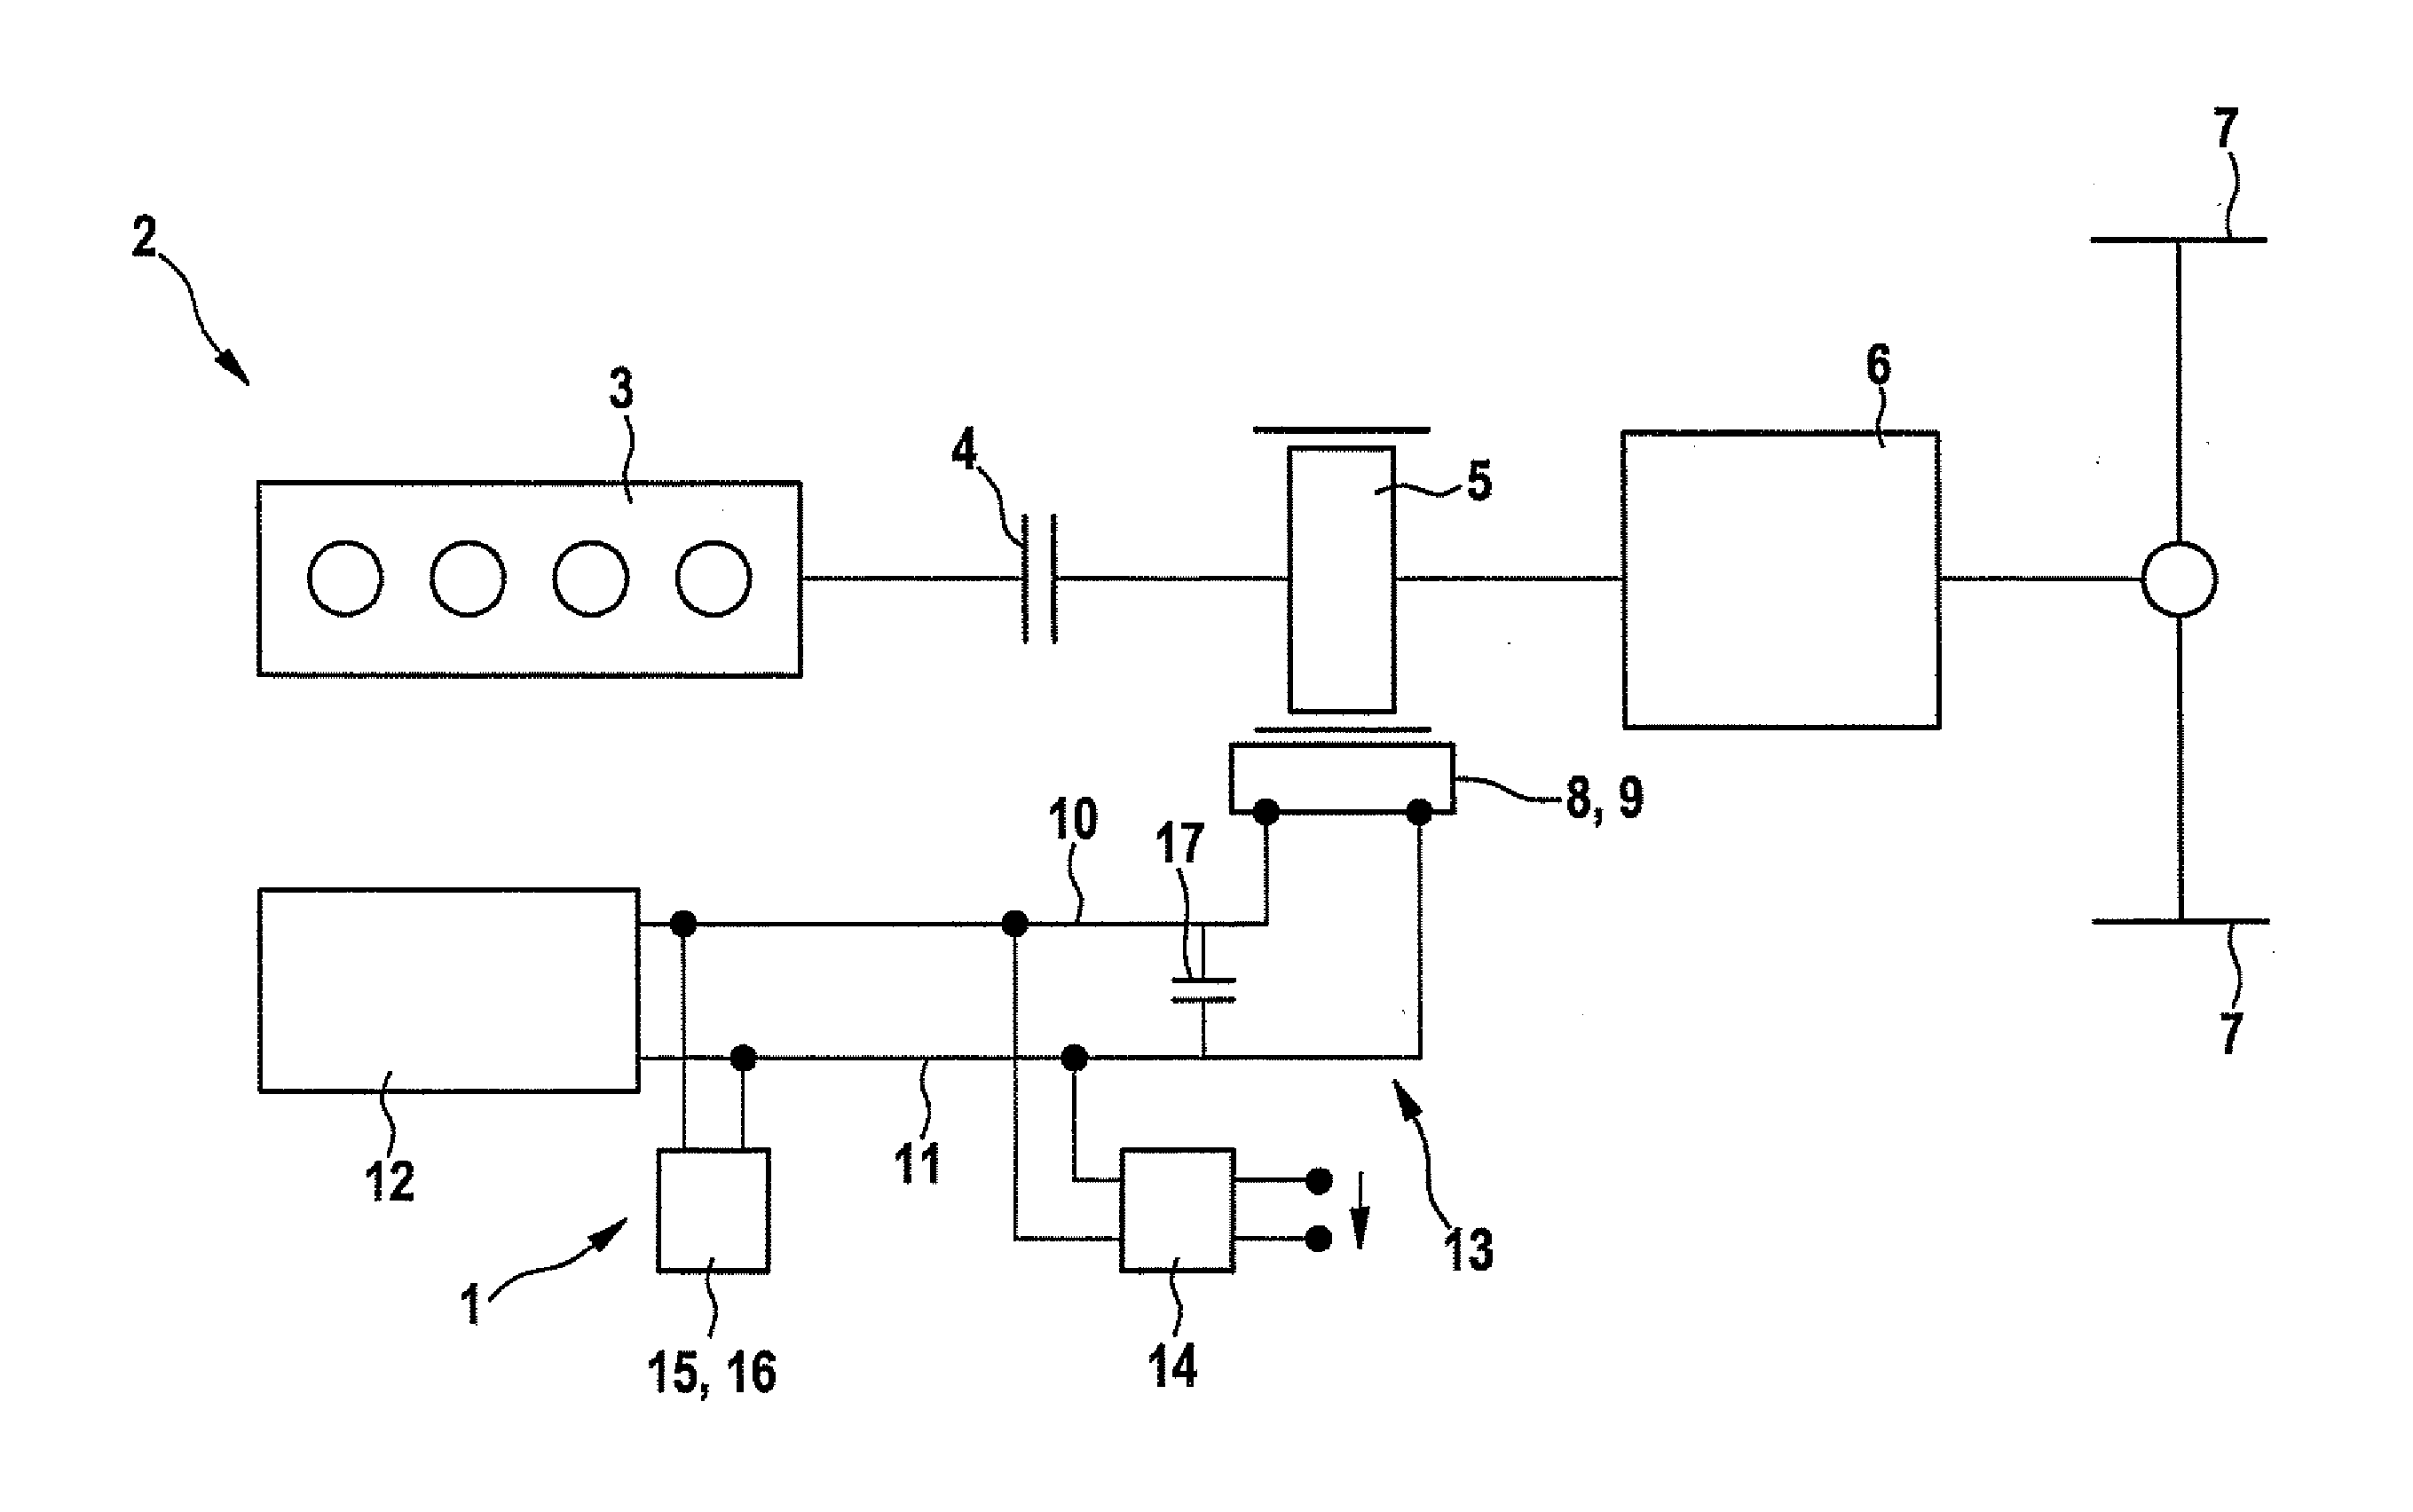 Method for operating an electrical network, in particular of a motor vehicle